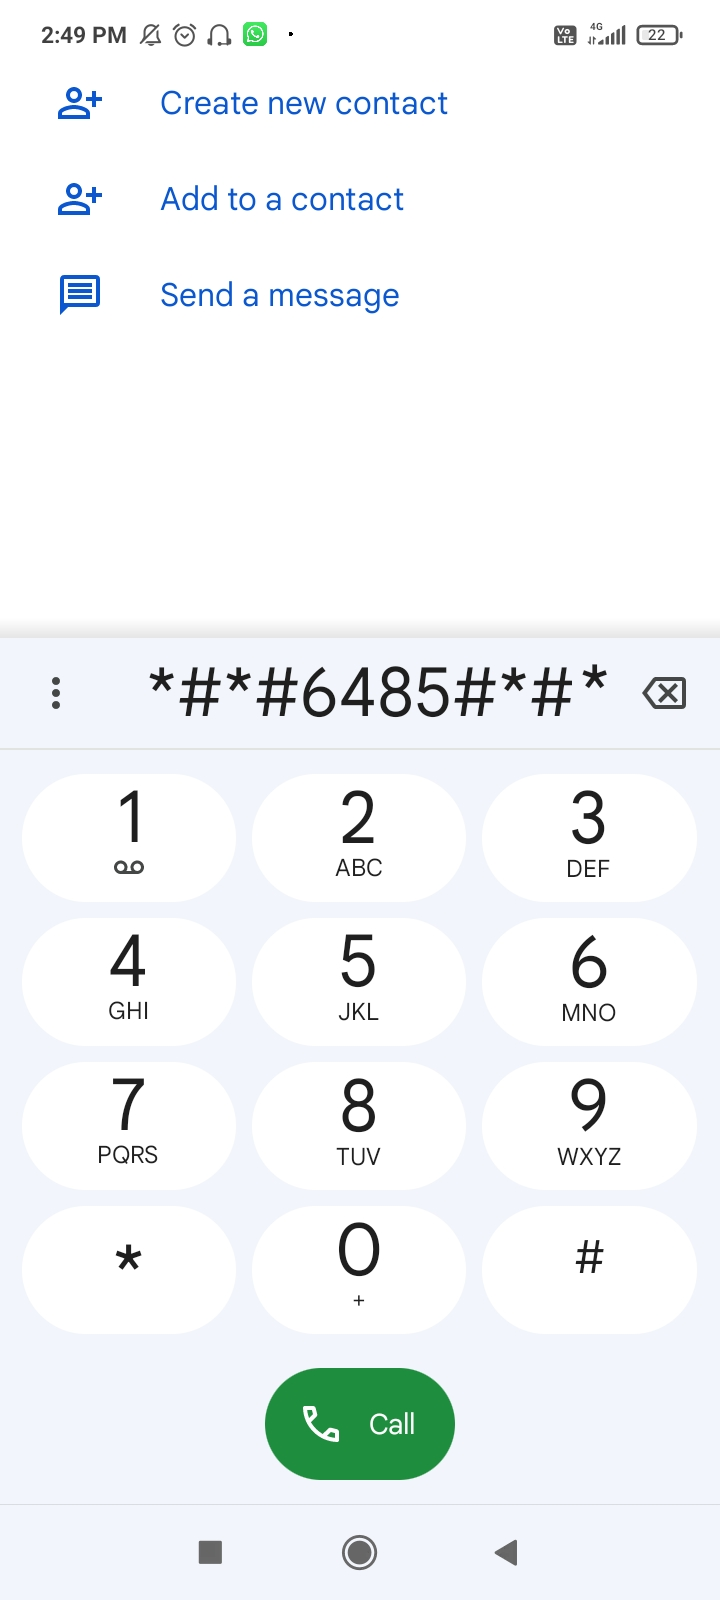 Secret code for checking battery health entered in the Android phone dialler app.